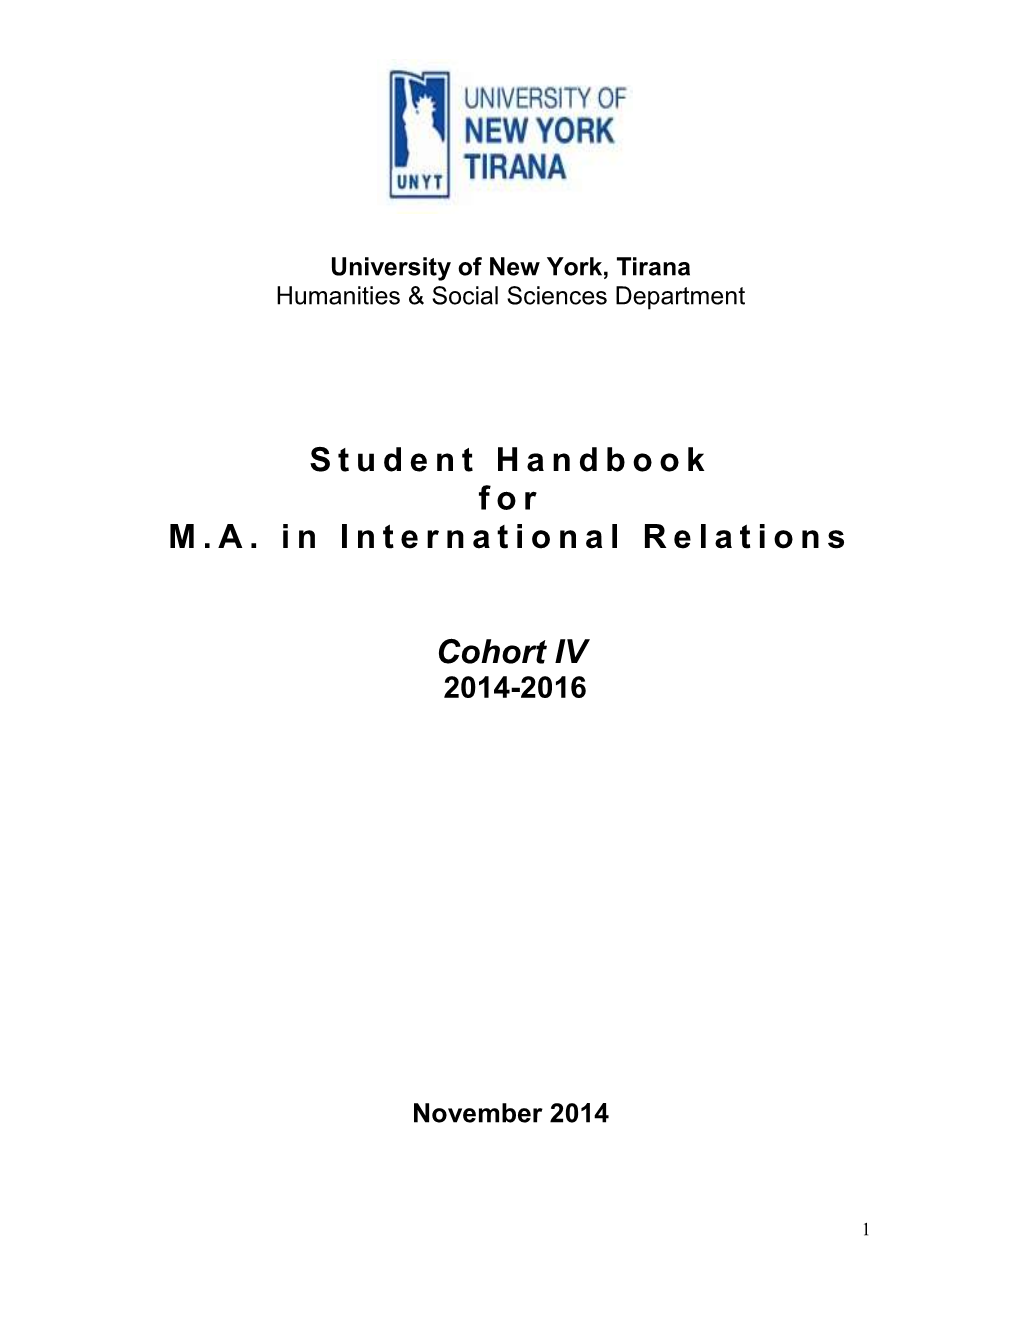 Student Handbook for M.A. in International Relations Cohort IV